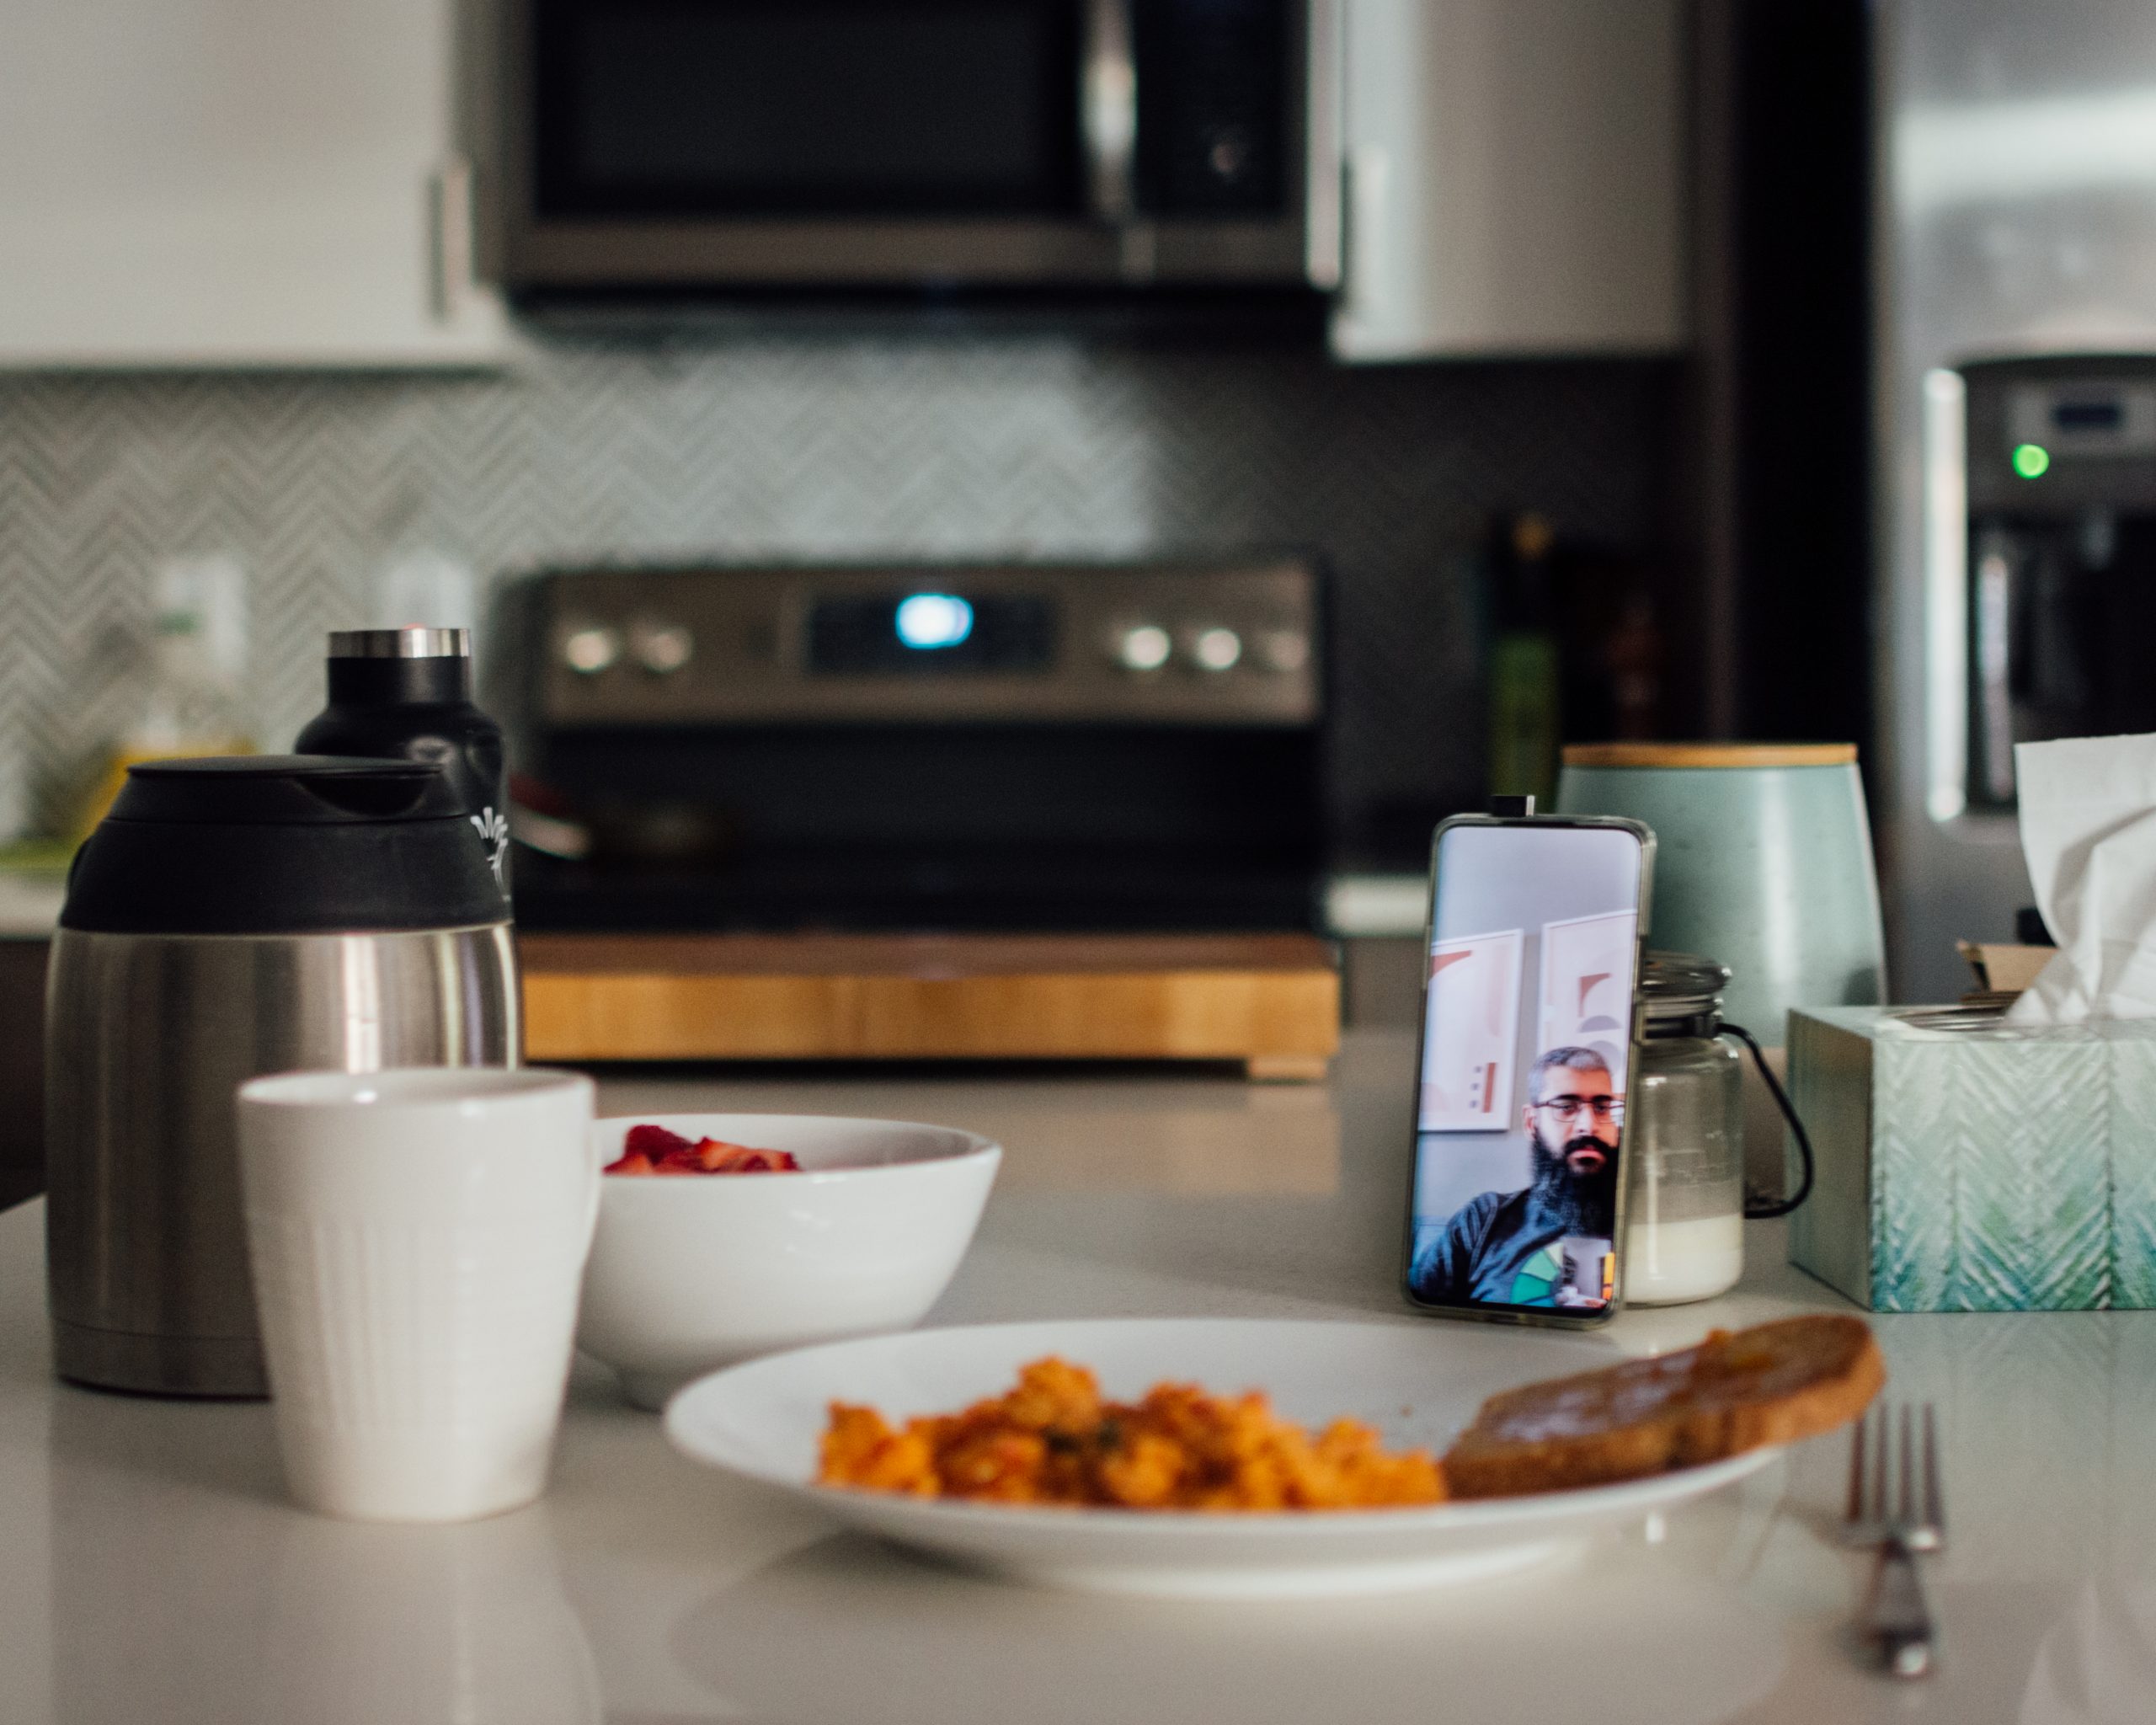 Photo of a meal with someone on a video call, on a propped up mobile phone.